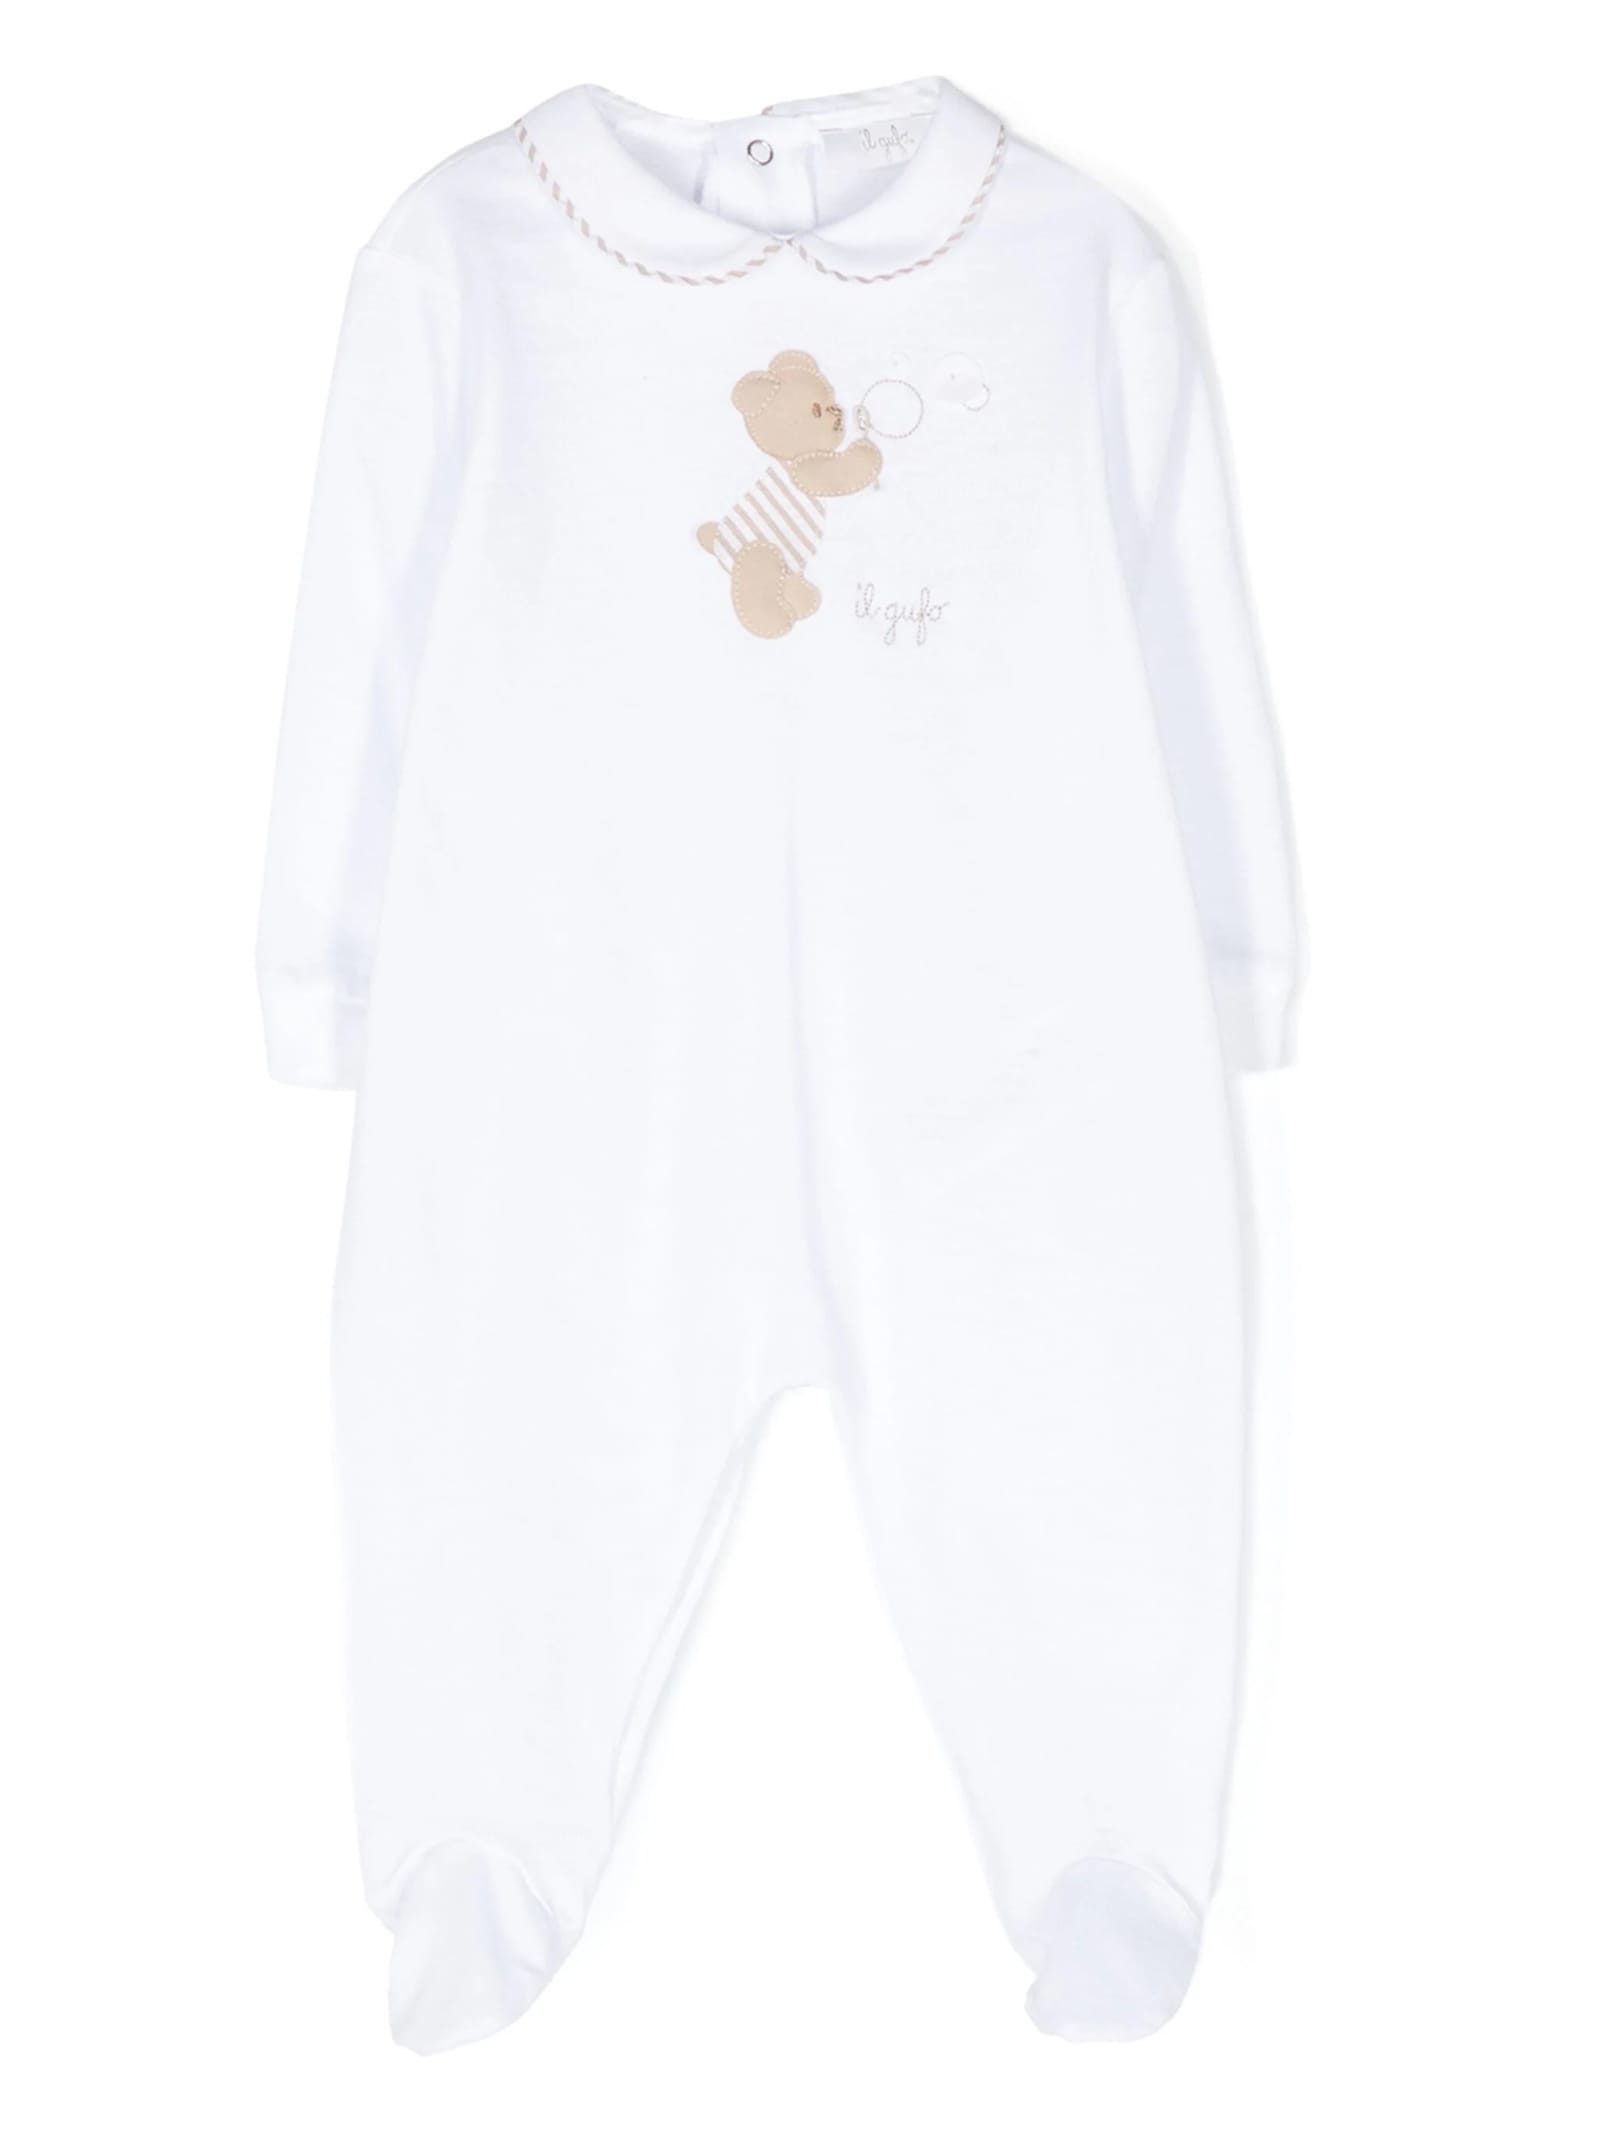 IL GUFO WHITE PLAYSUIT WITH FEET AND TEDDY-BEAR EMBELLISHMENT